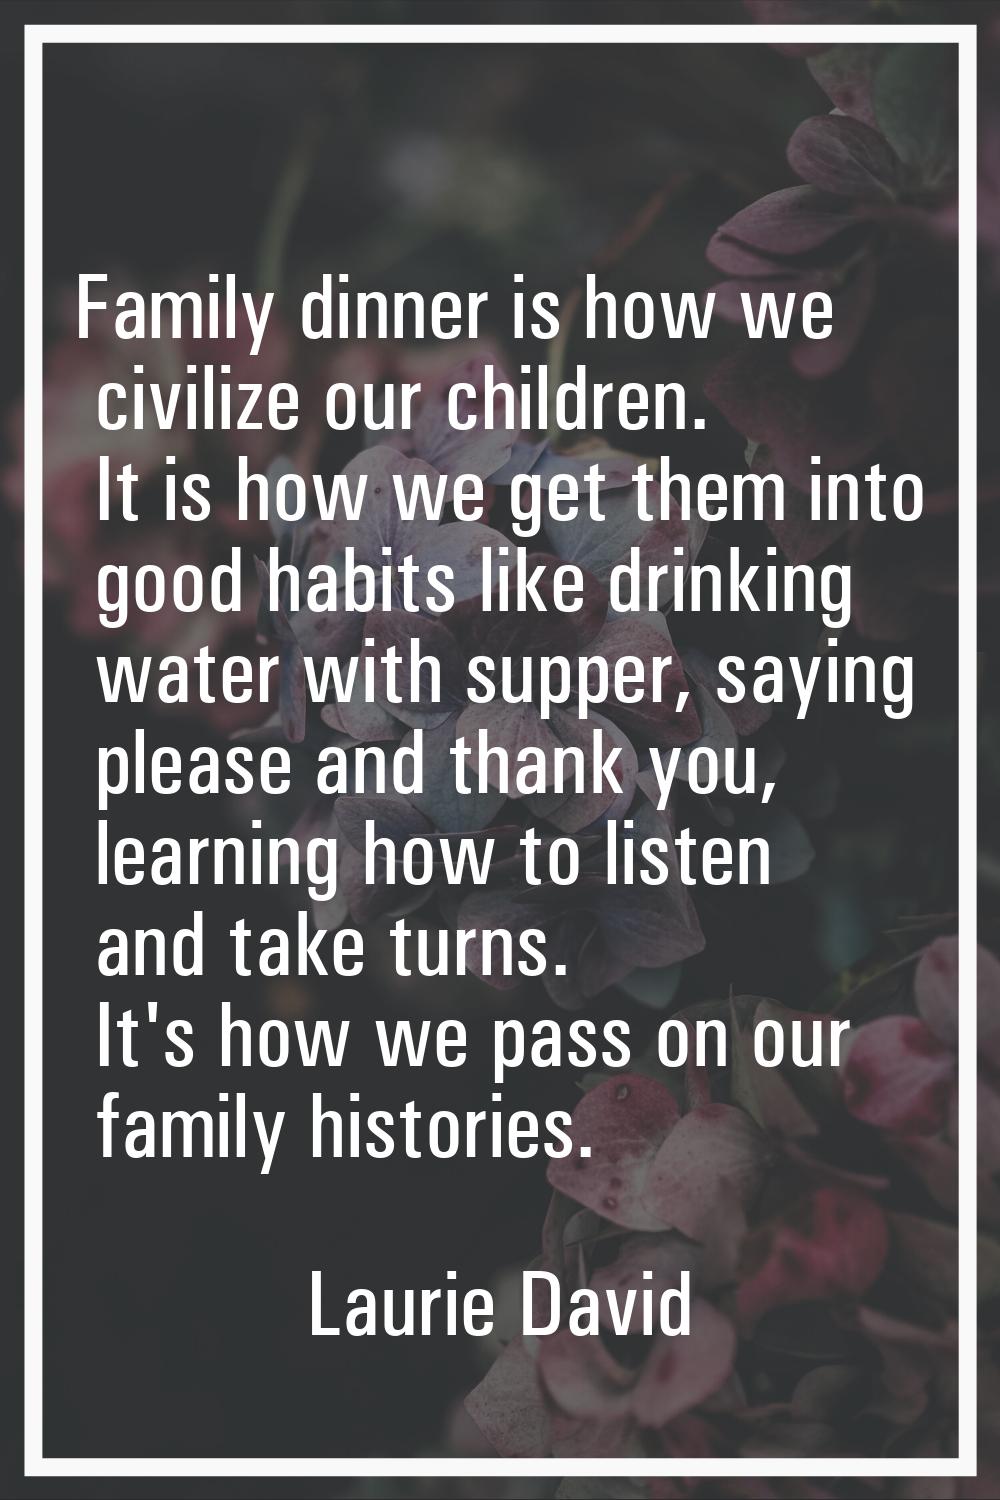 Family dinner is how we civilize our children. It is how we get them into good habits like drinking